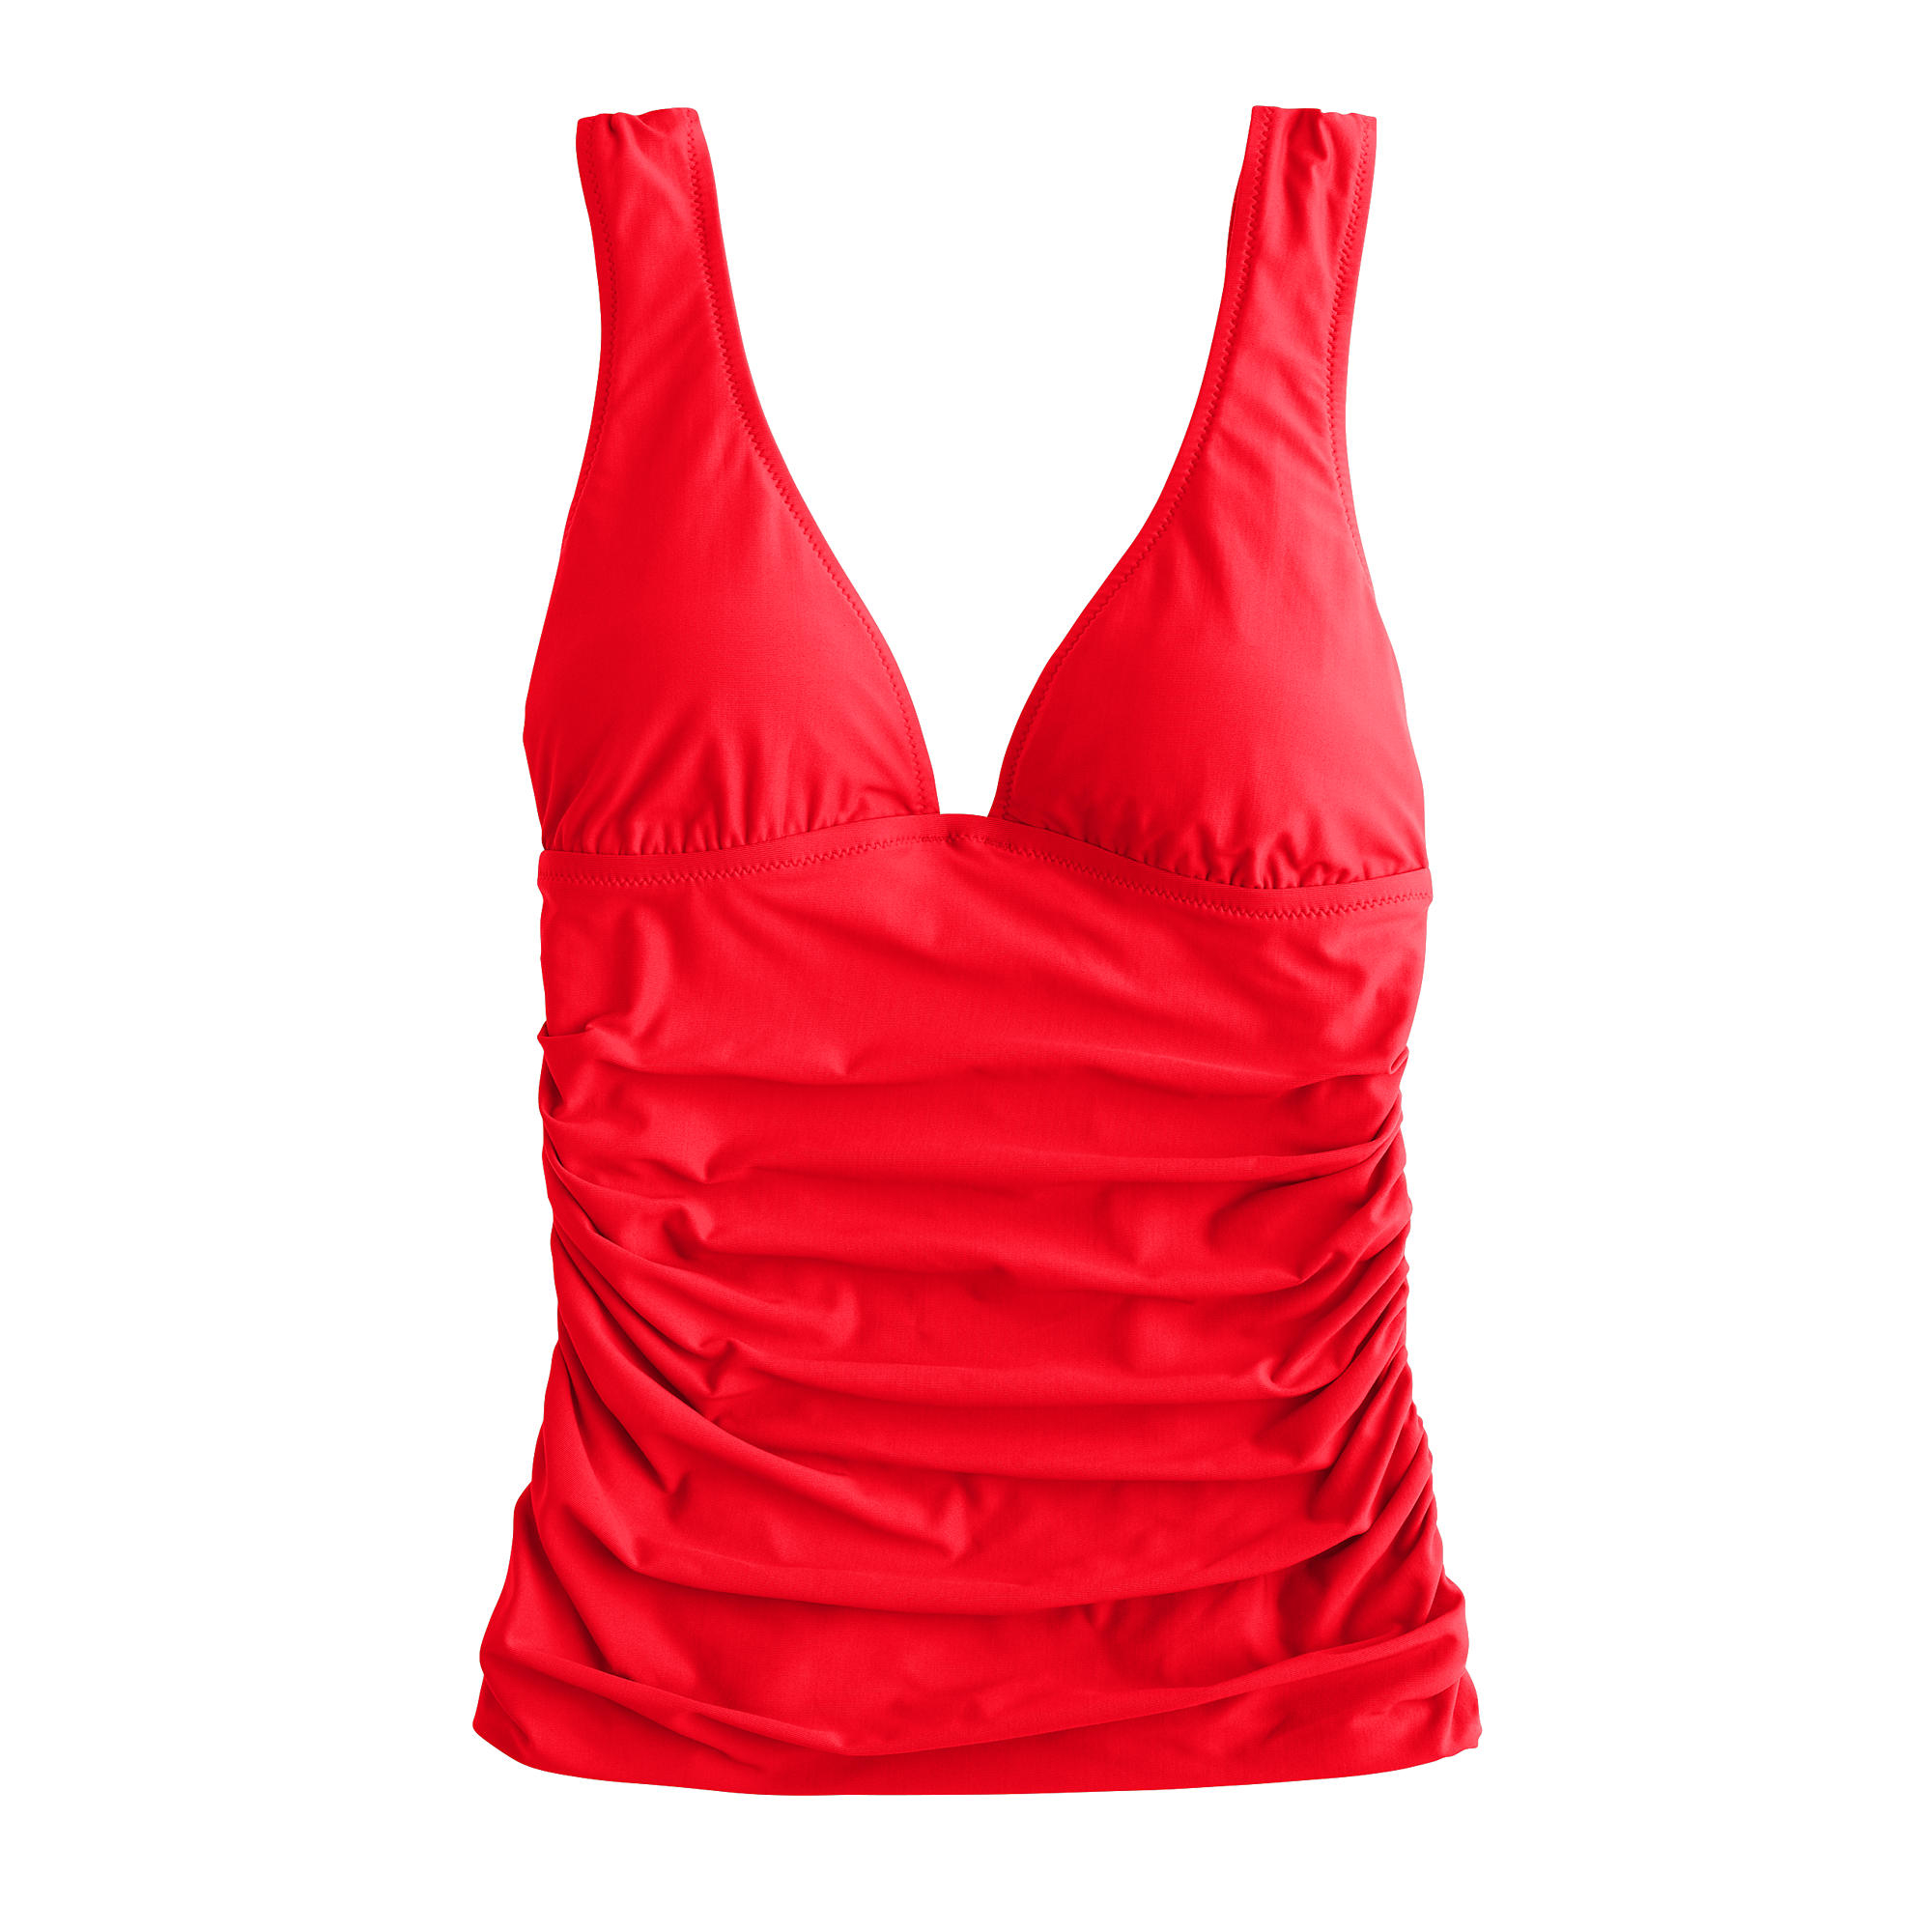 J.crew Ruched Tankini Top in Red (belvedere red) | Lyst